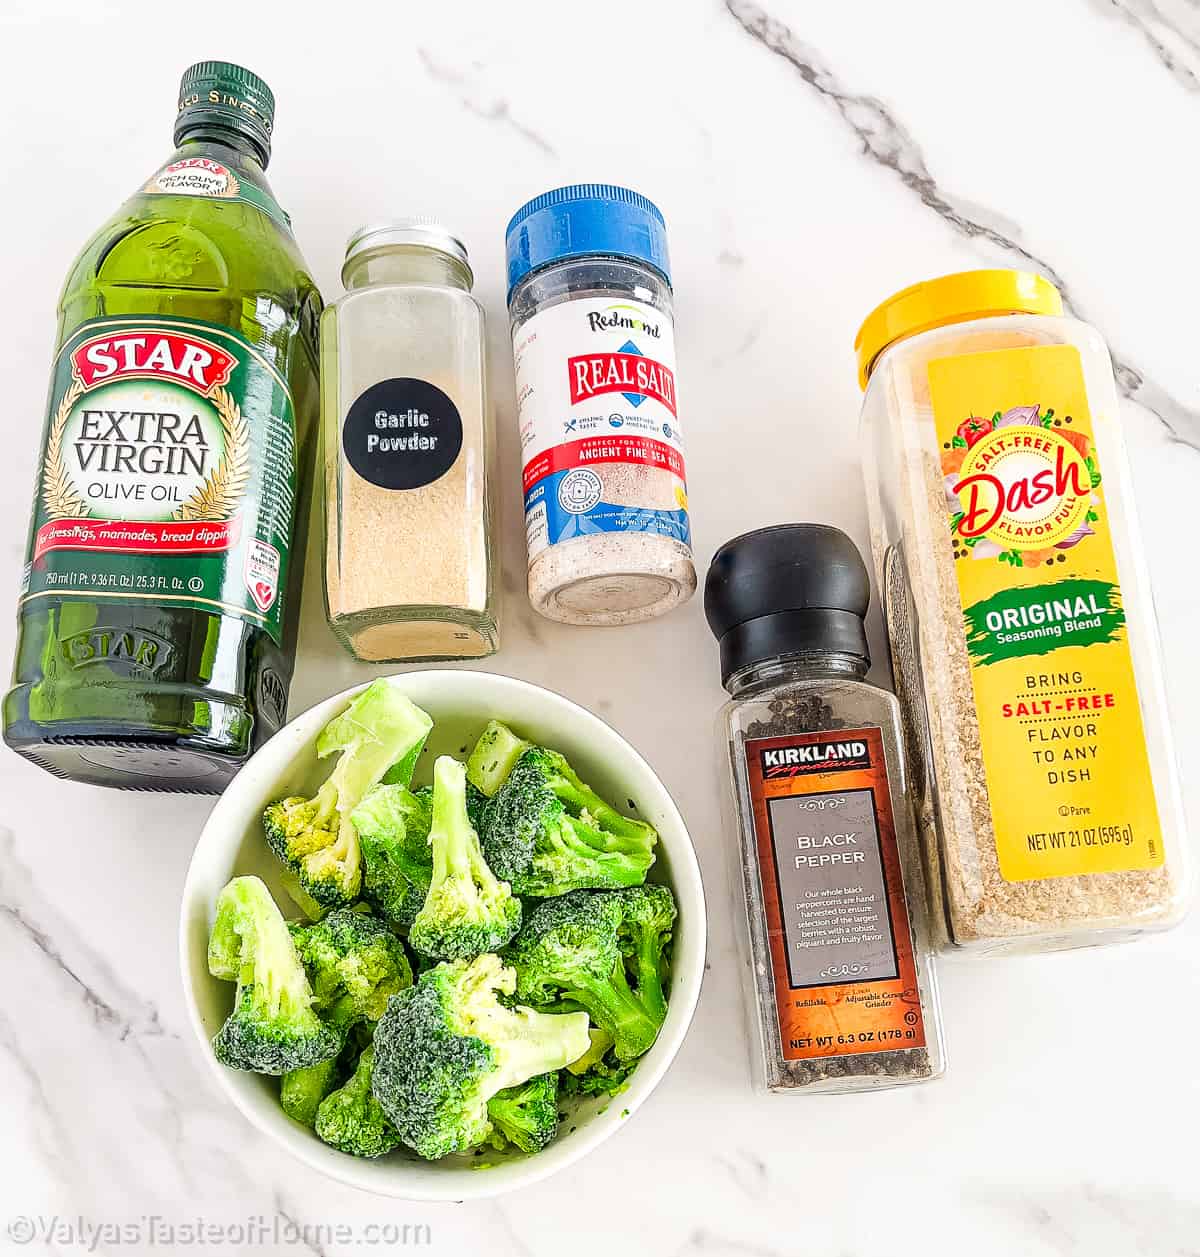 All you need are some simple pantry staple ingredients to make this air fryer frozen broccoli recipe at home.